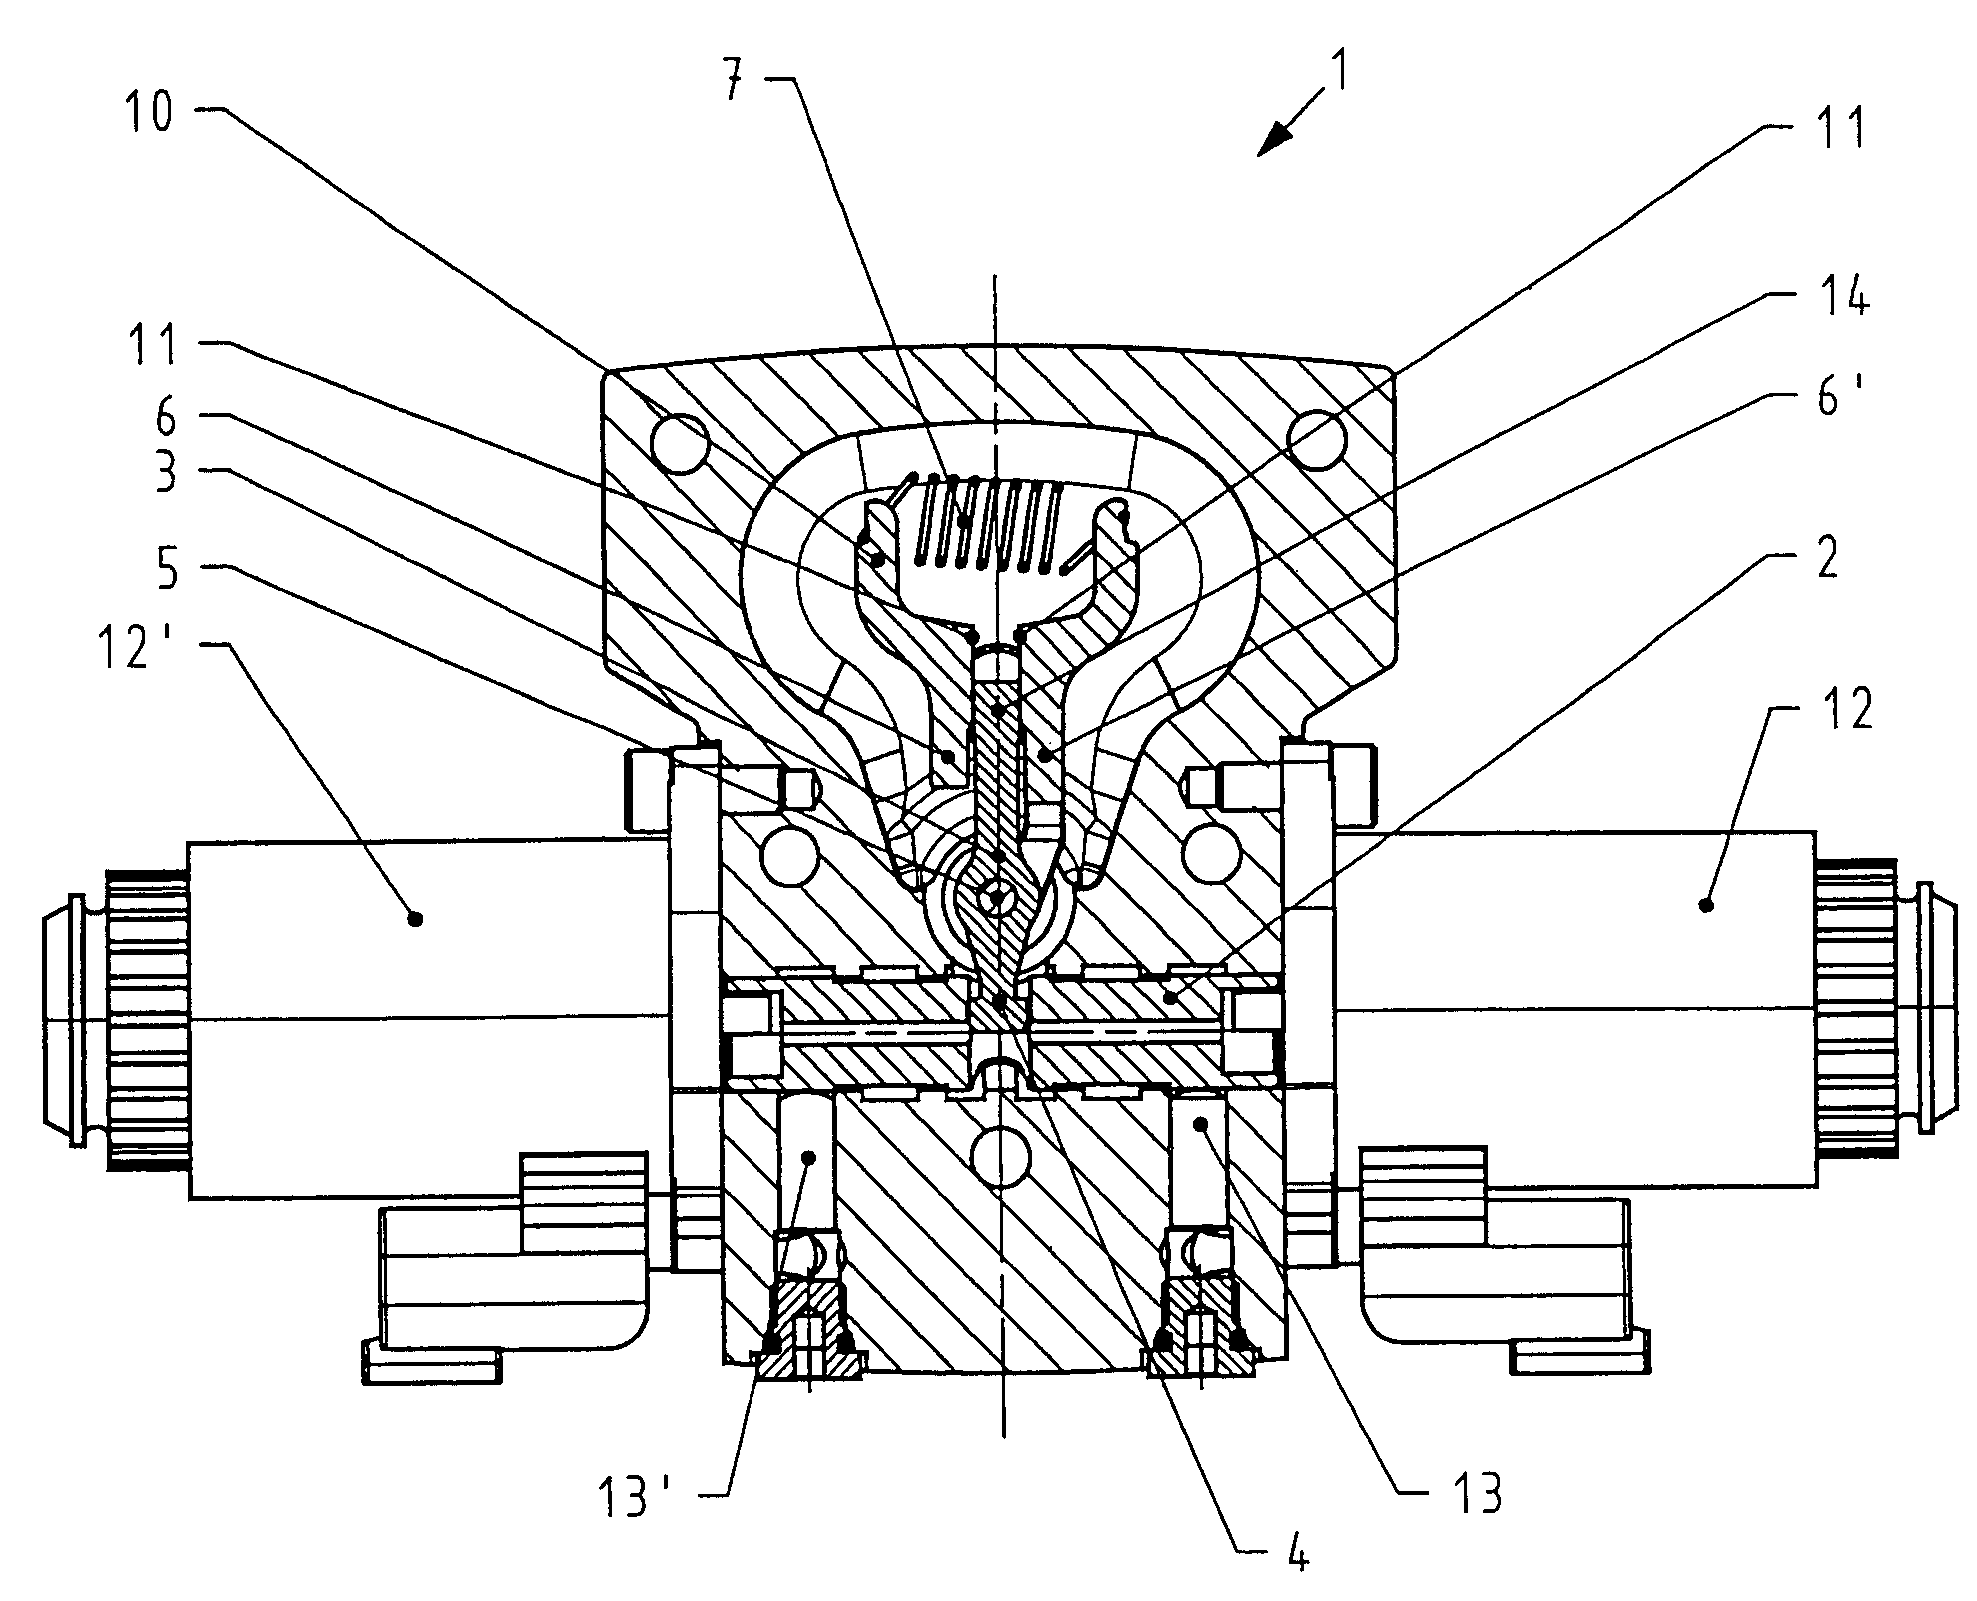 Axial piston machine having a device for the electrically proportional adjustment of its volumetric displacement